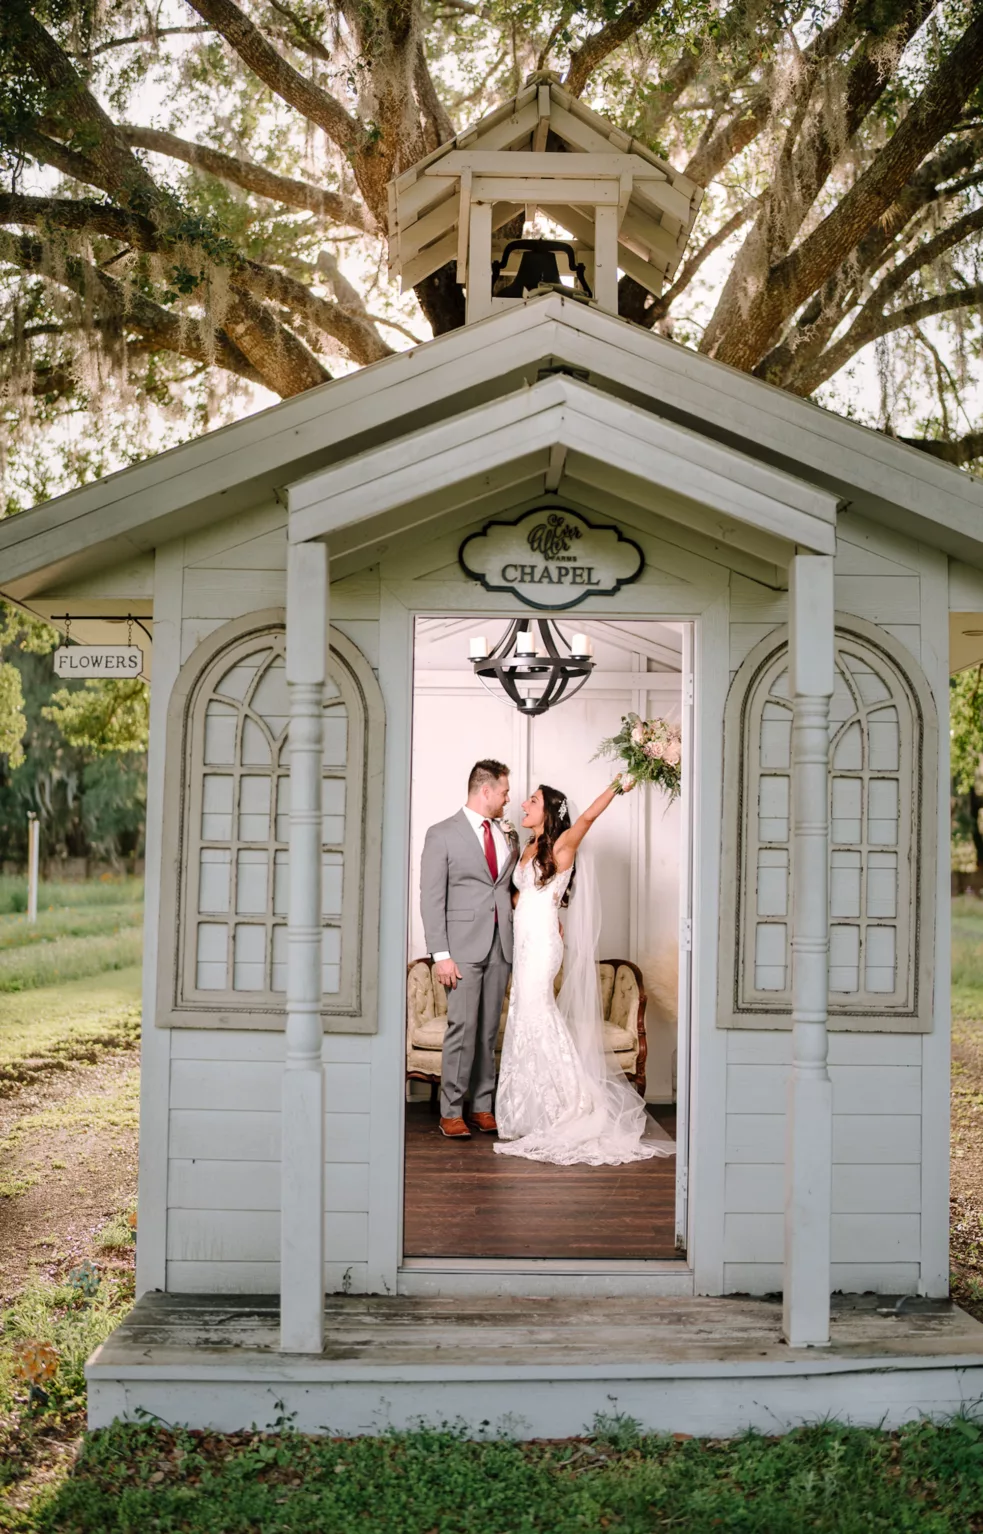 Bride and Groom In Chapel Sunset Wedding Portrait | Rustic Boho Wedding Inspiration | Florida Event Venue Ever After Farms Flower Wedding Barn | Tampa Wedding Photographer and Videographer Sabrina Autumn Photography